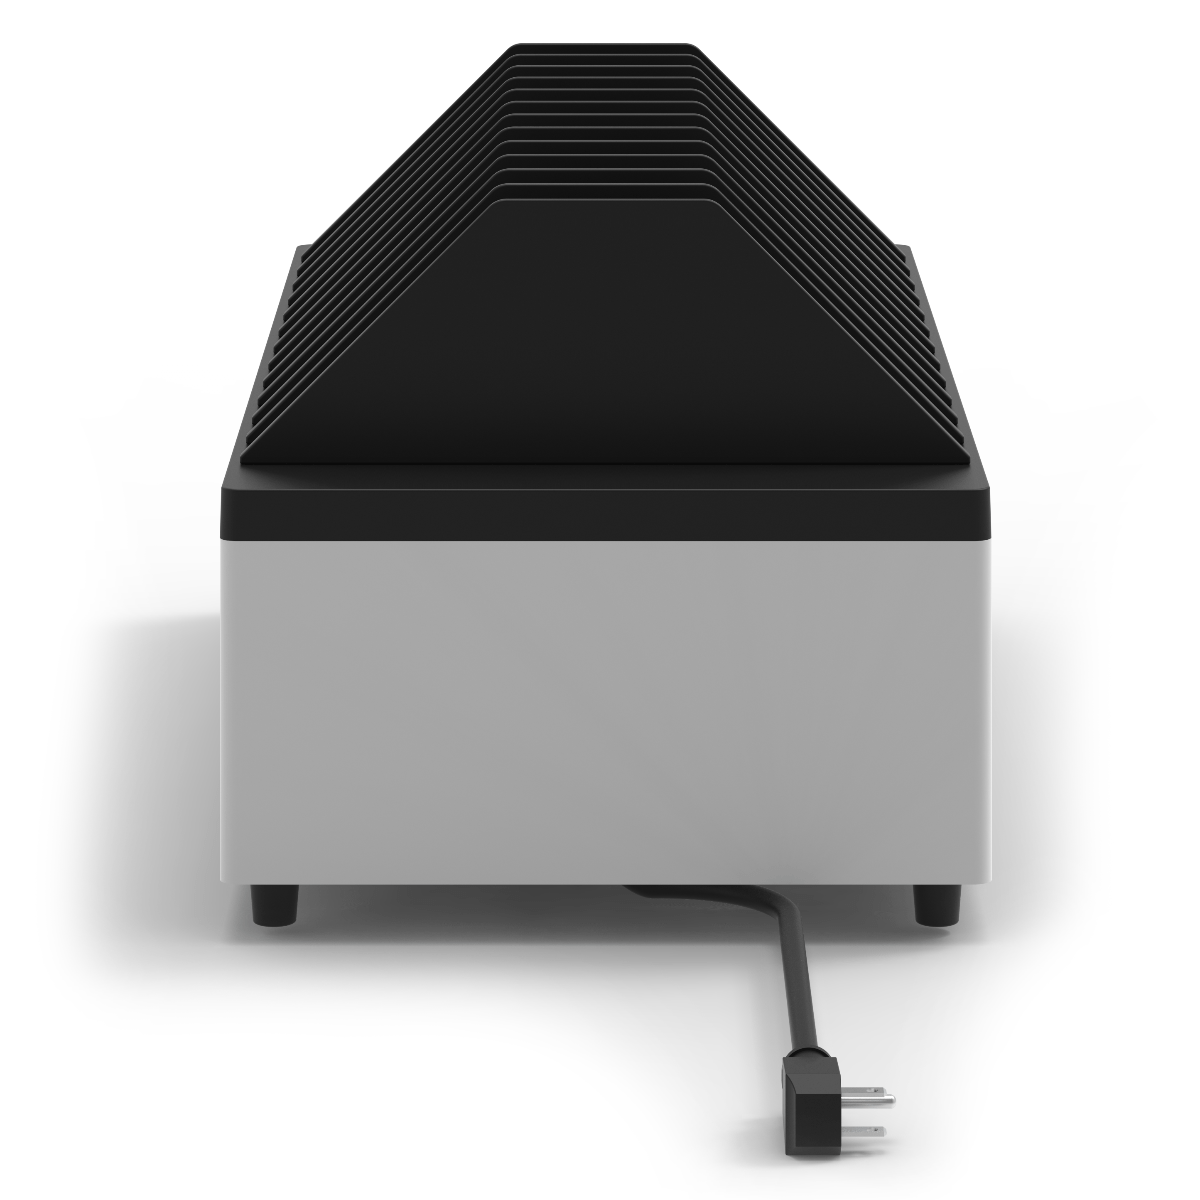 Luxor LOTT12 12-Port Charging Station for Laptops, Tablets, and Mobile Devices - SchoolOutlet